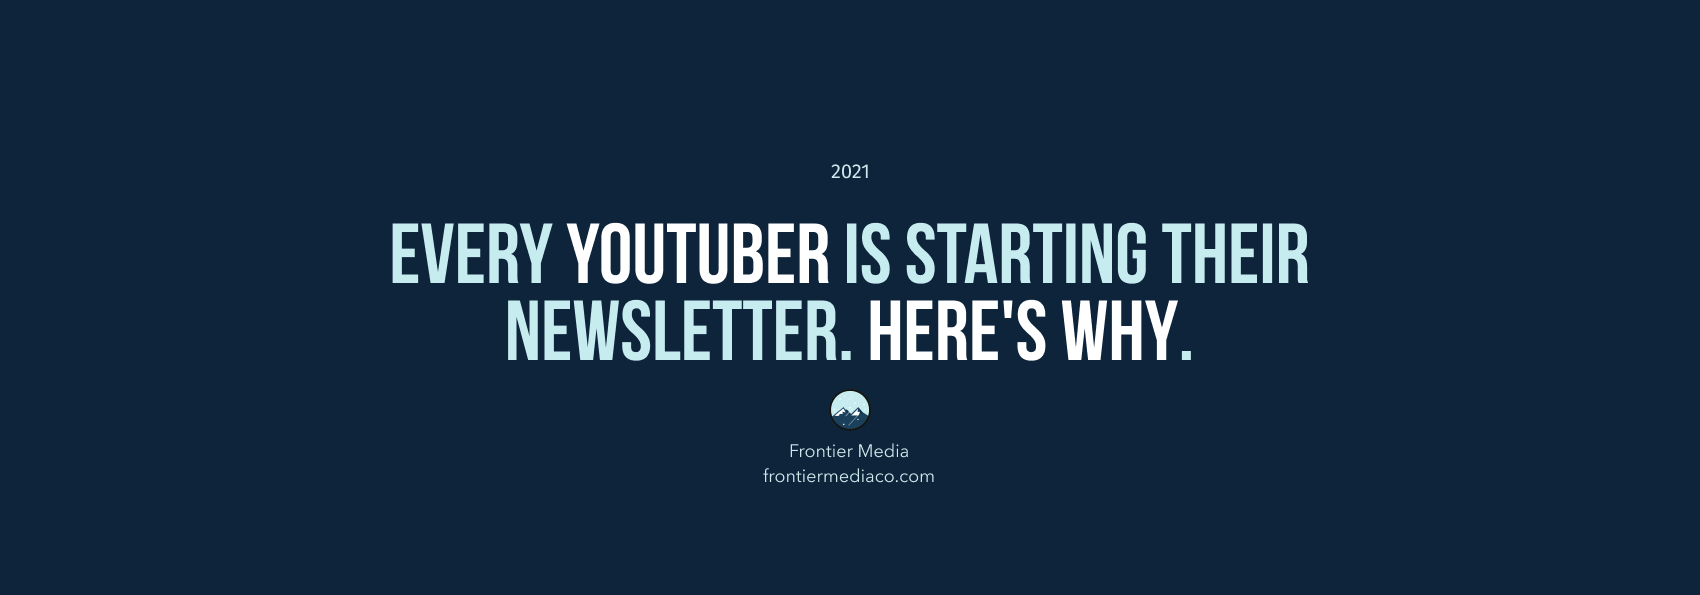 Every YouTuber is Starting Their Newsletter. Here's why.